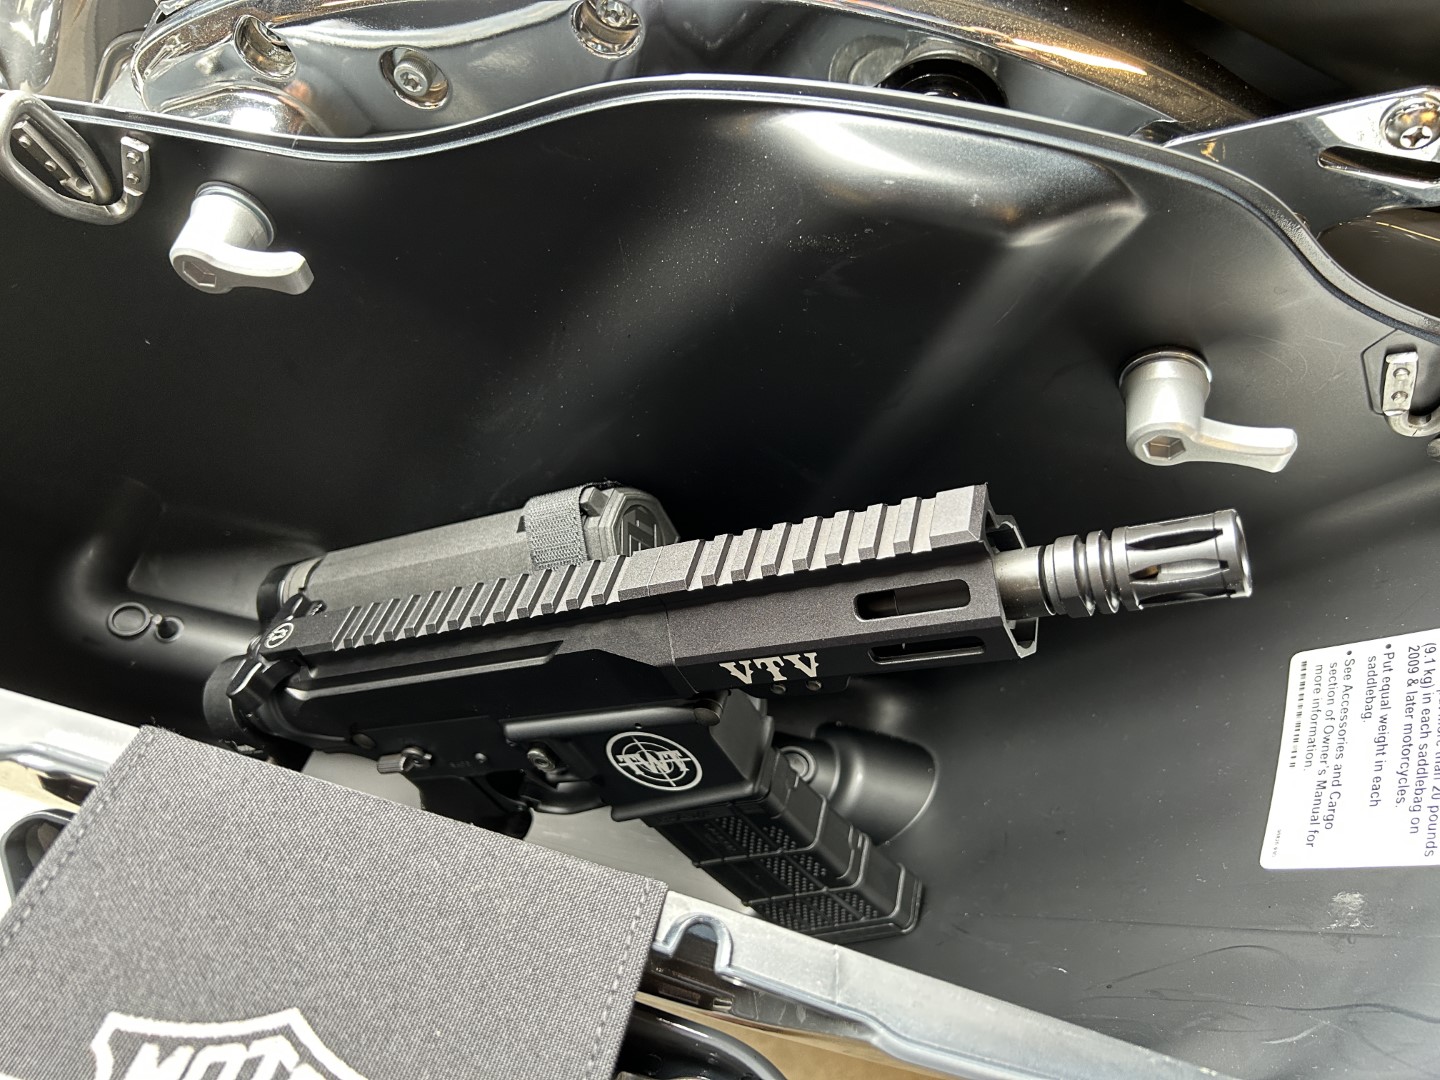 Introducing a new line of AR-15 Pistols for the Motorcycle Community - "The Bagger Blaster"